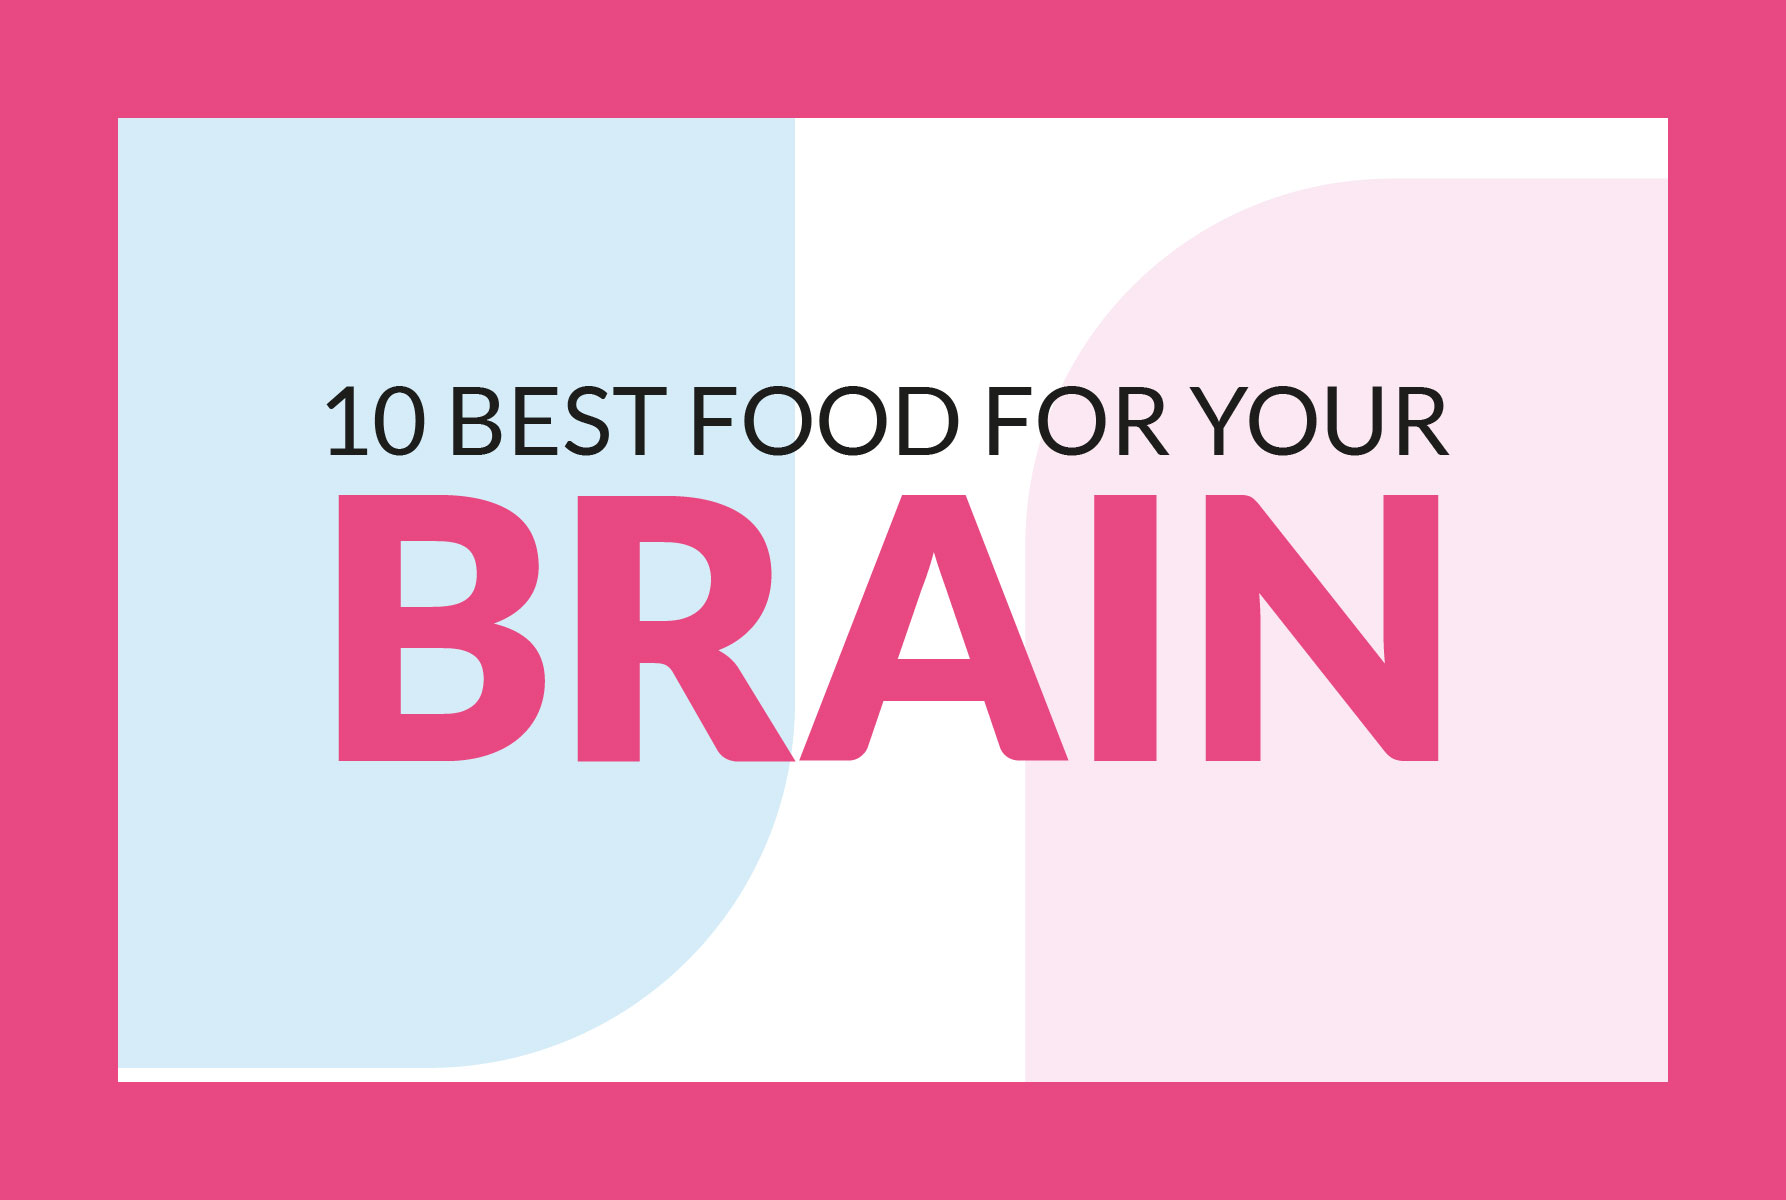 Food for Your Brain